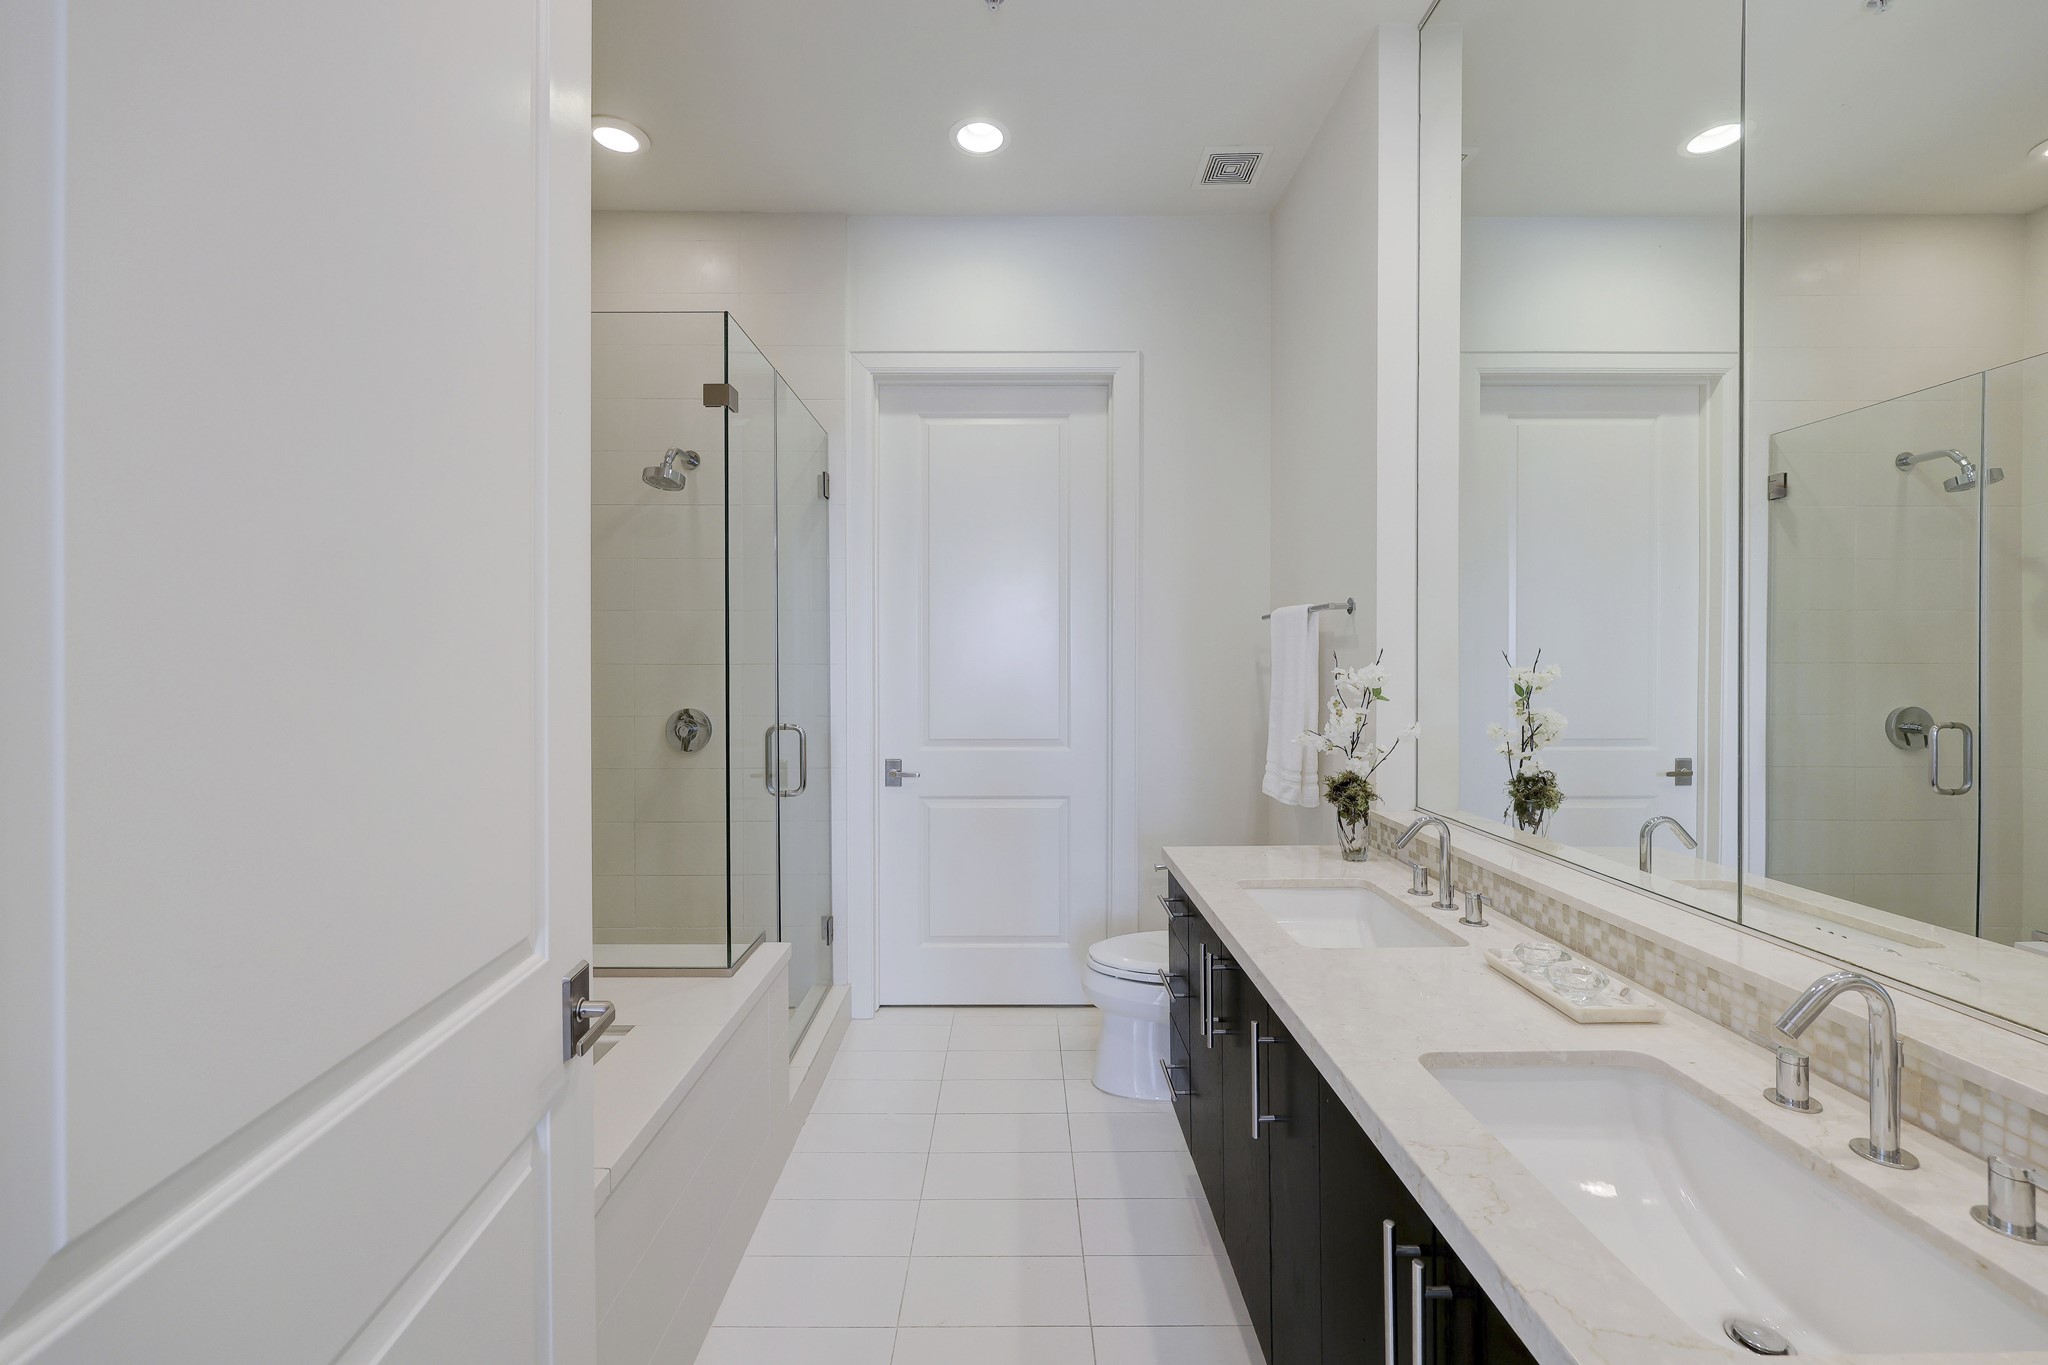 An oversized frameless glass shower and large walk-in closet are at the far end.